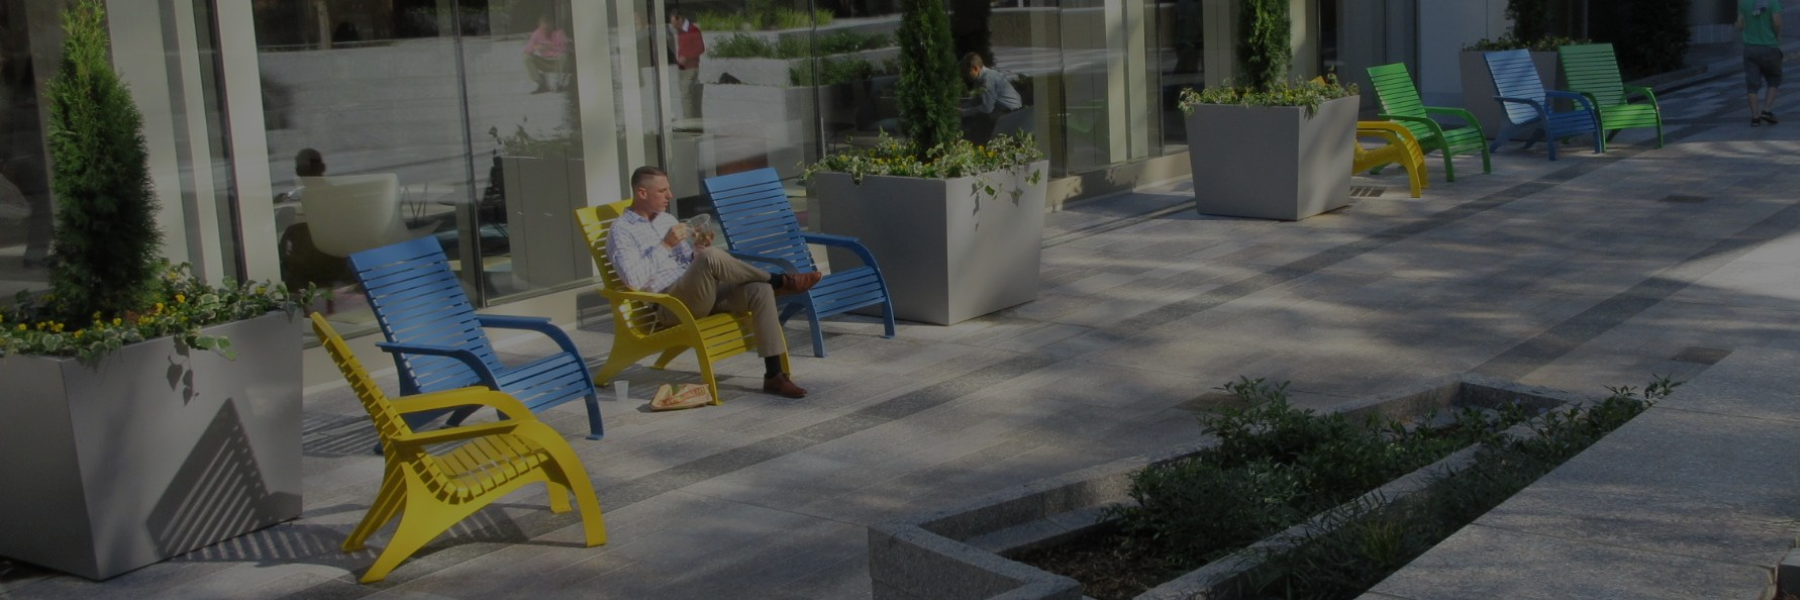 Man sitting in Adirondack type chair outside an office building 